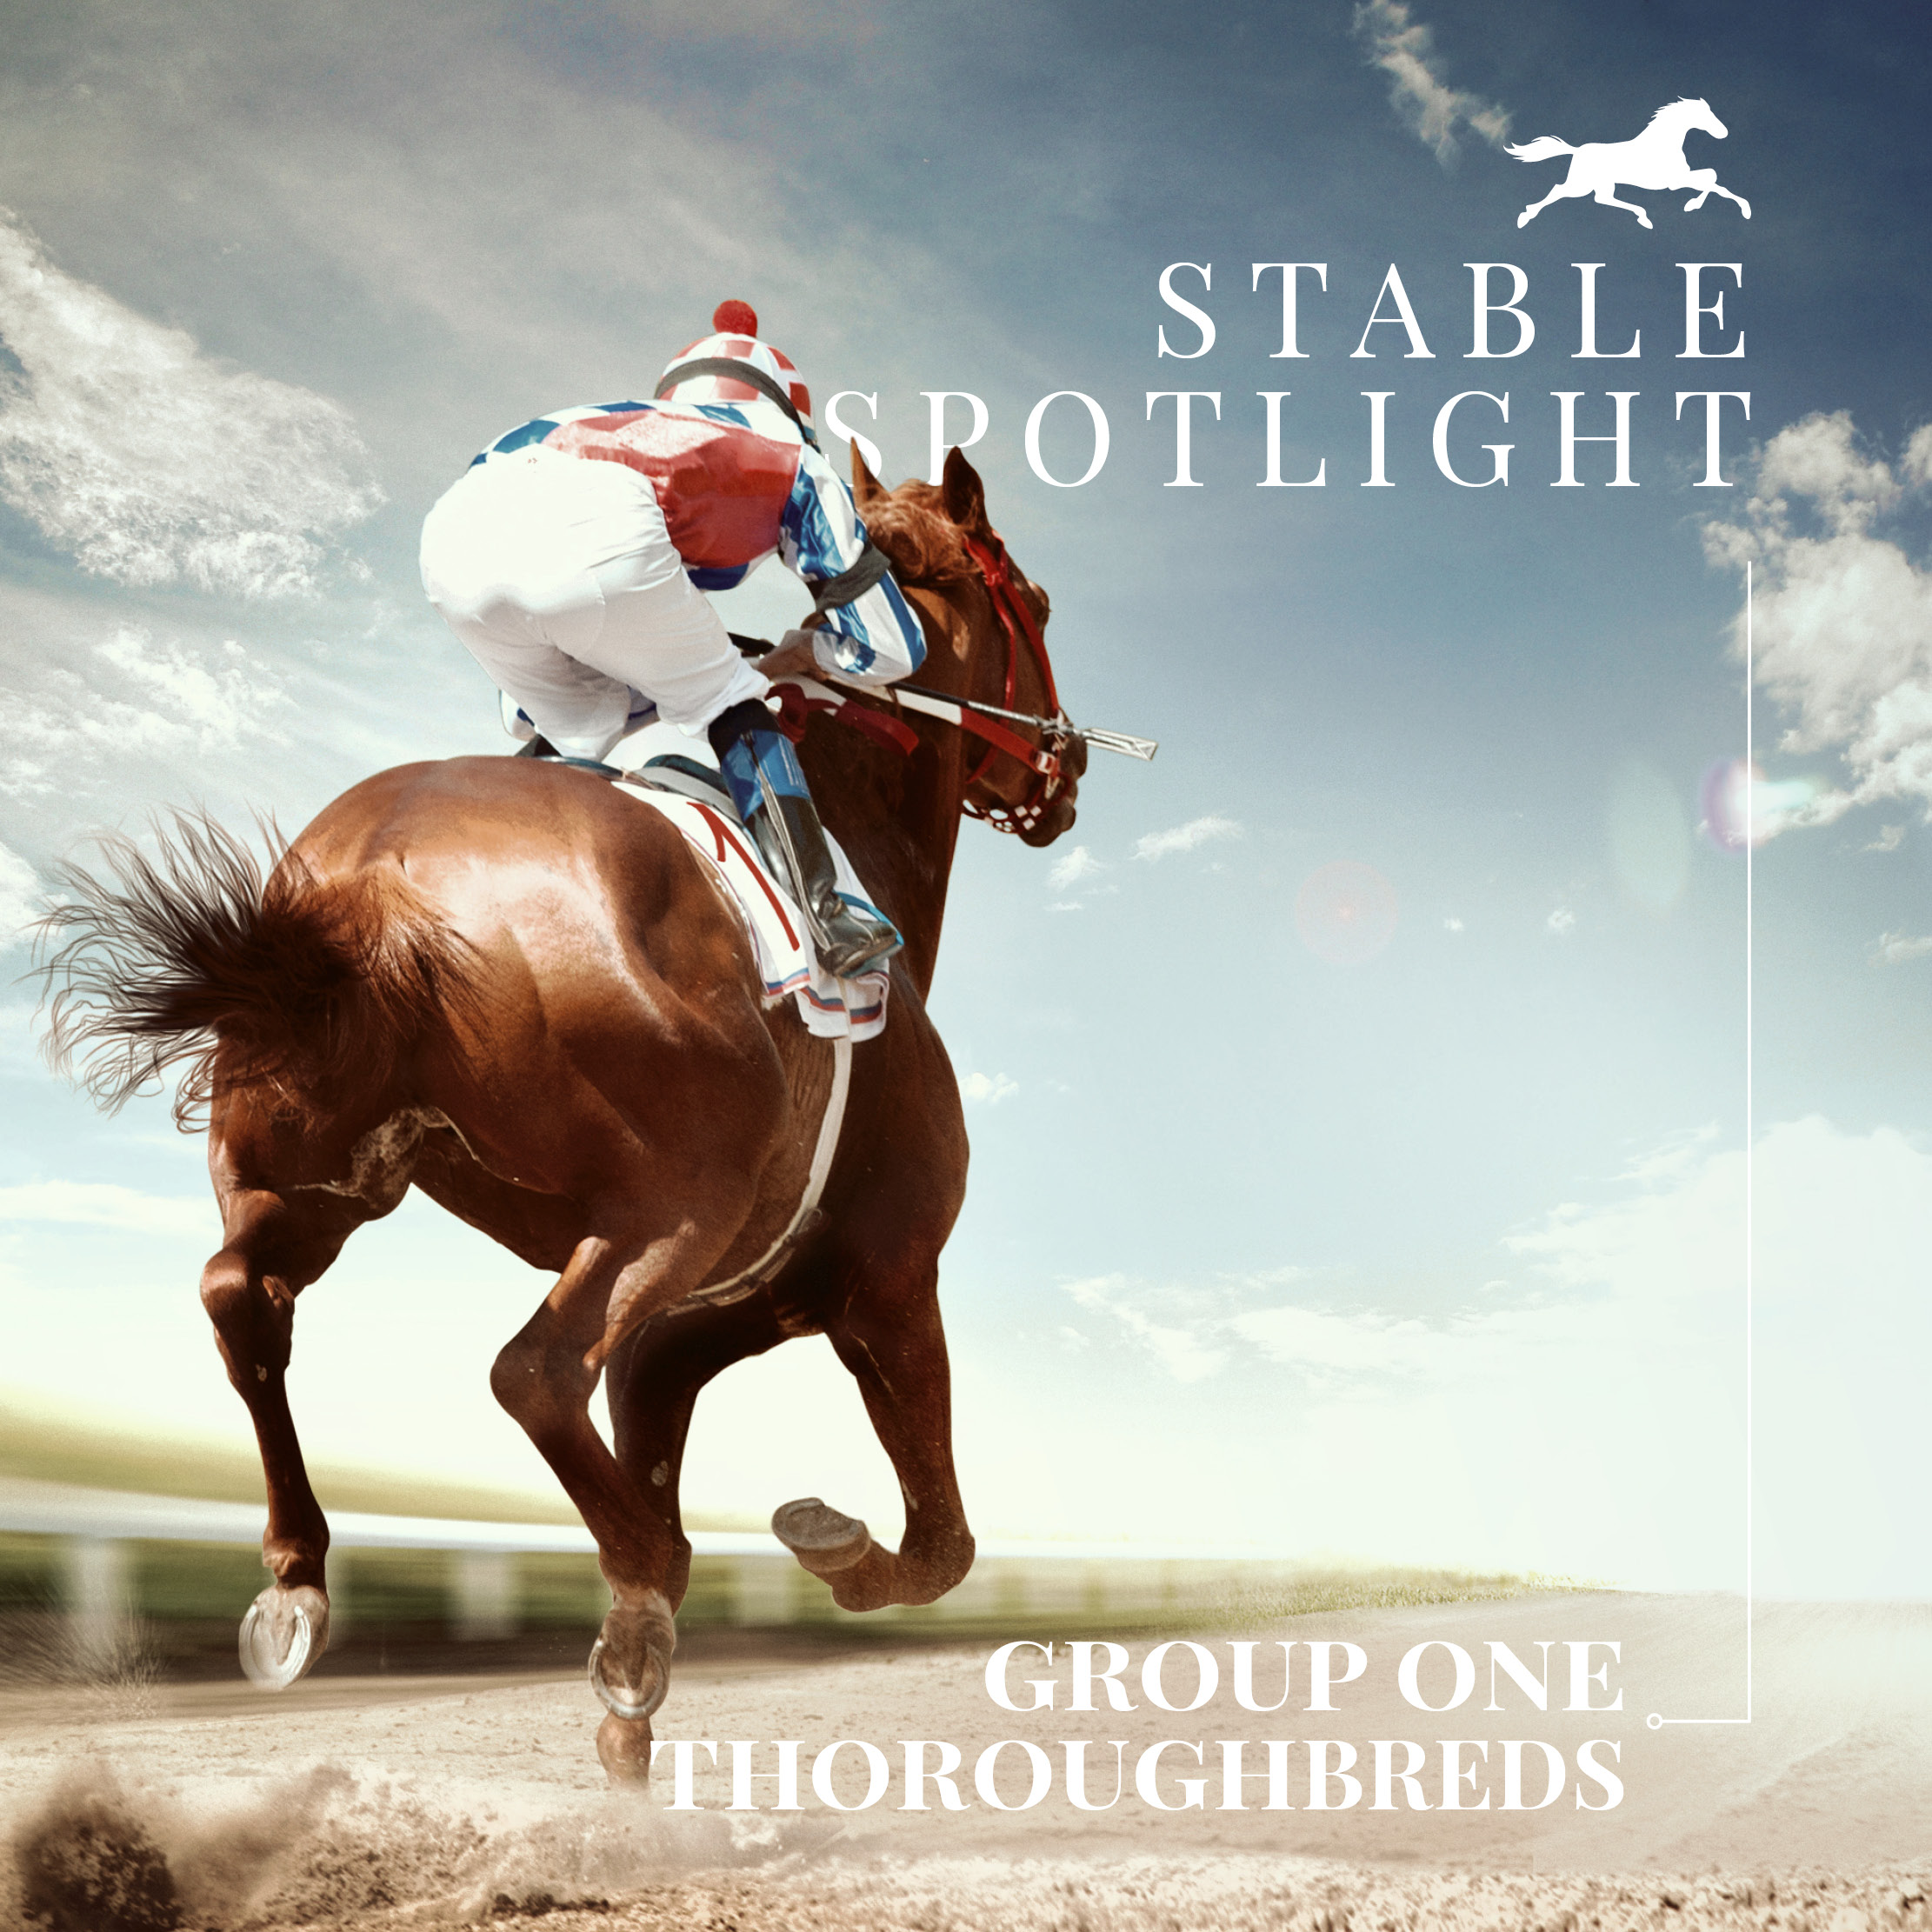 Stable Spotlight – Group One Thoroughbreds